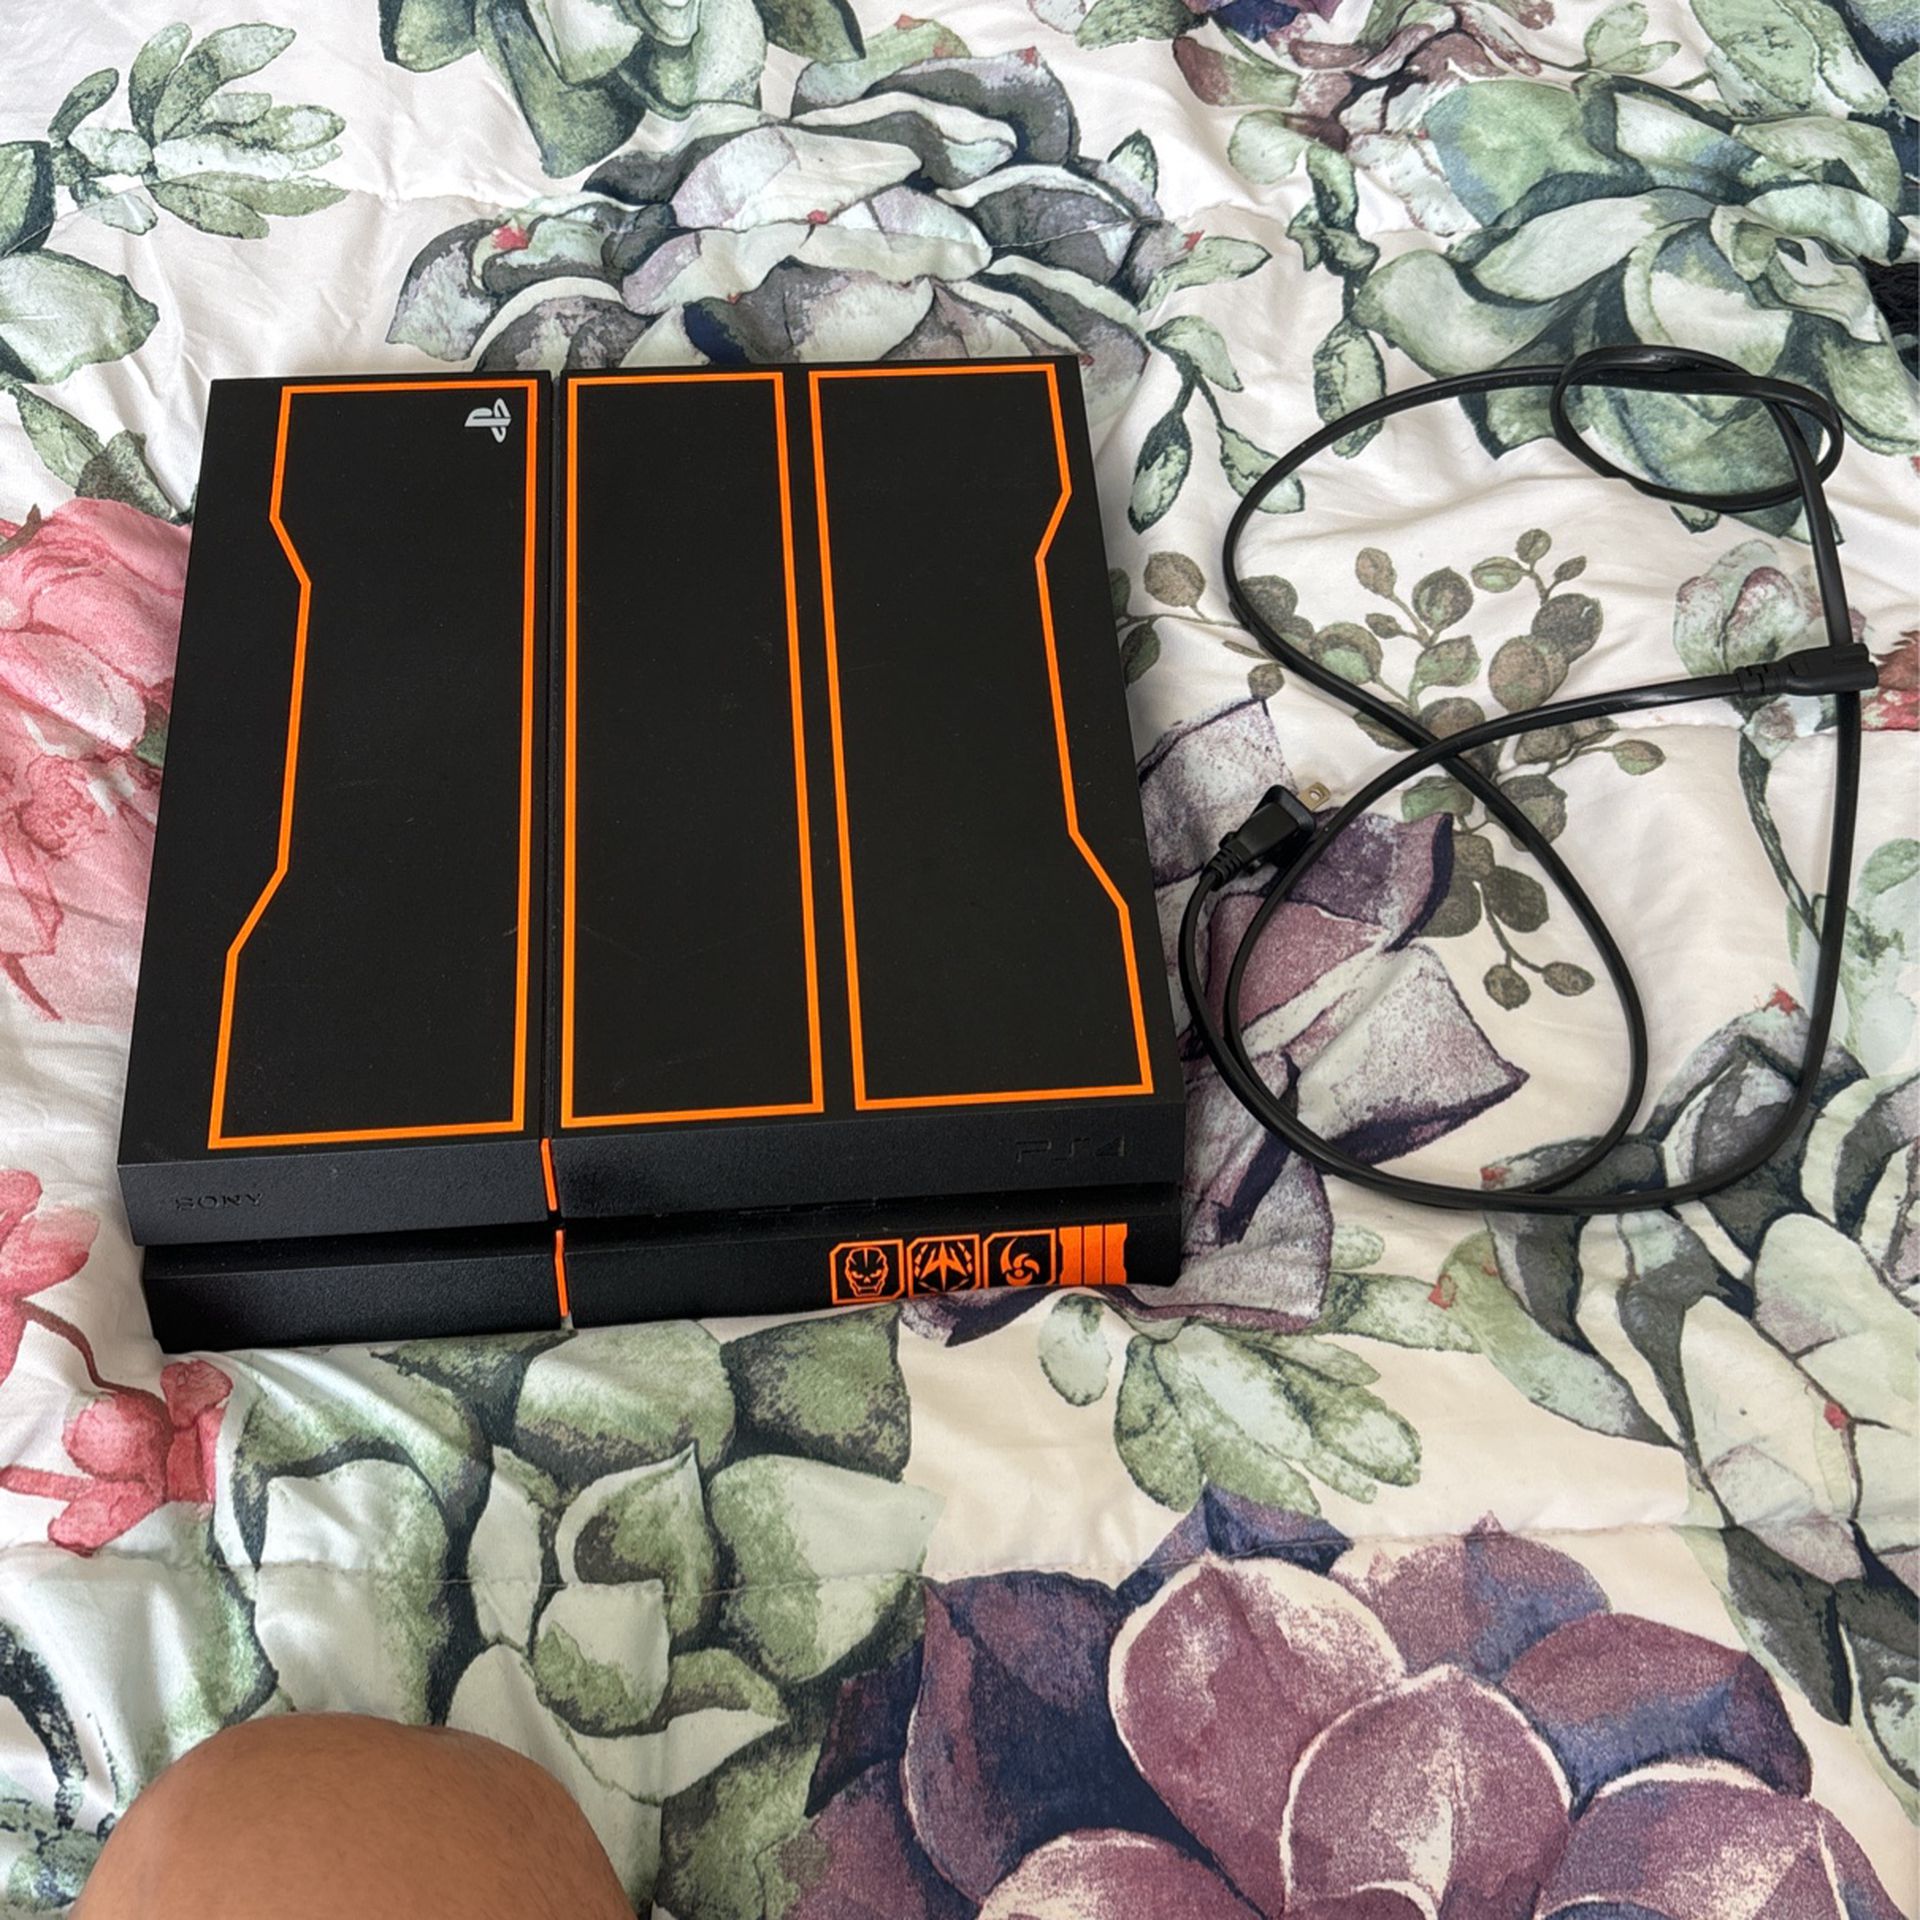 PS4 Black Ops 3 Edition 